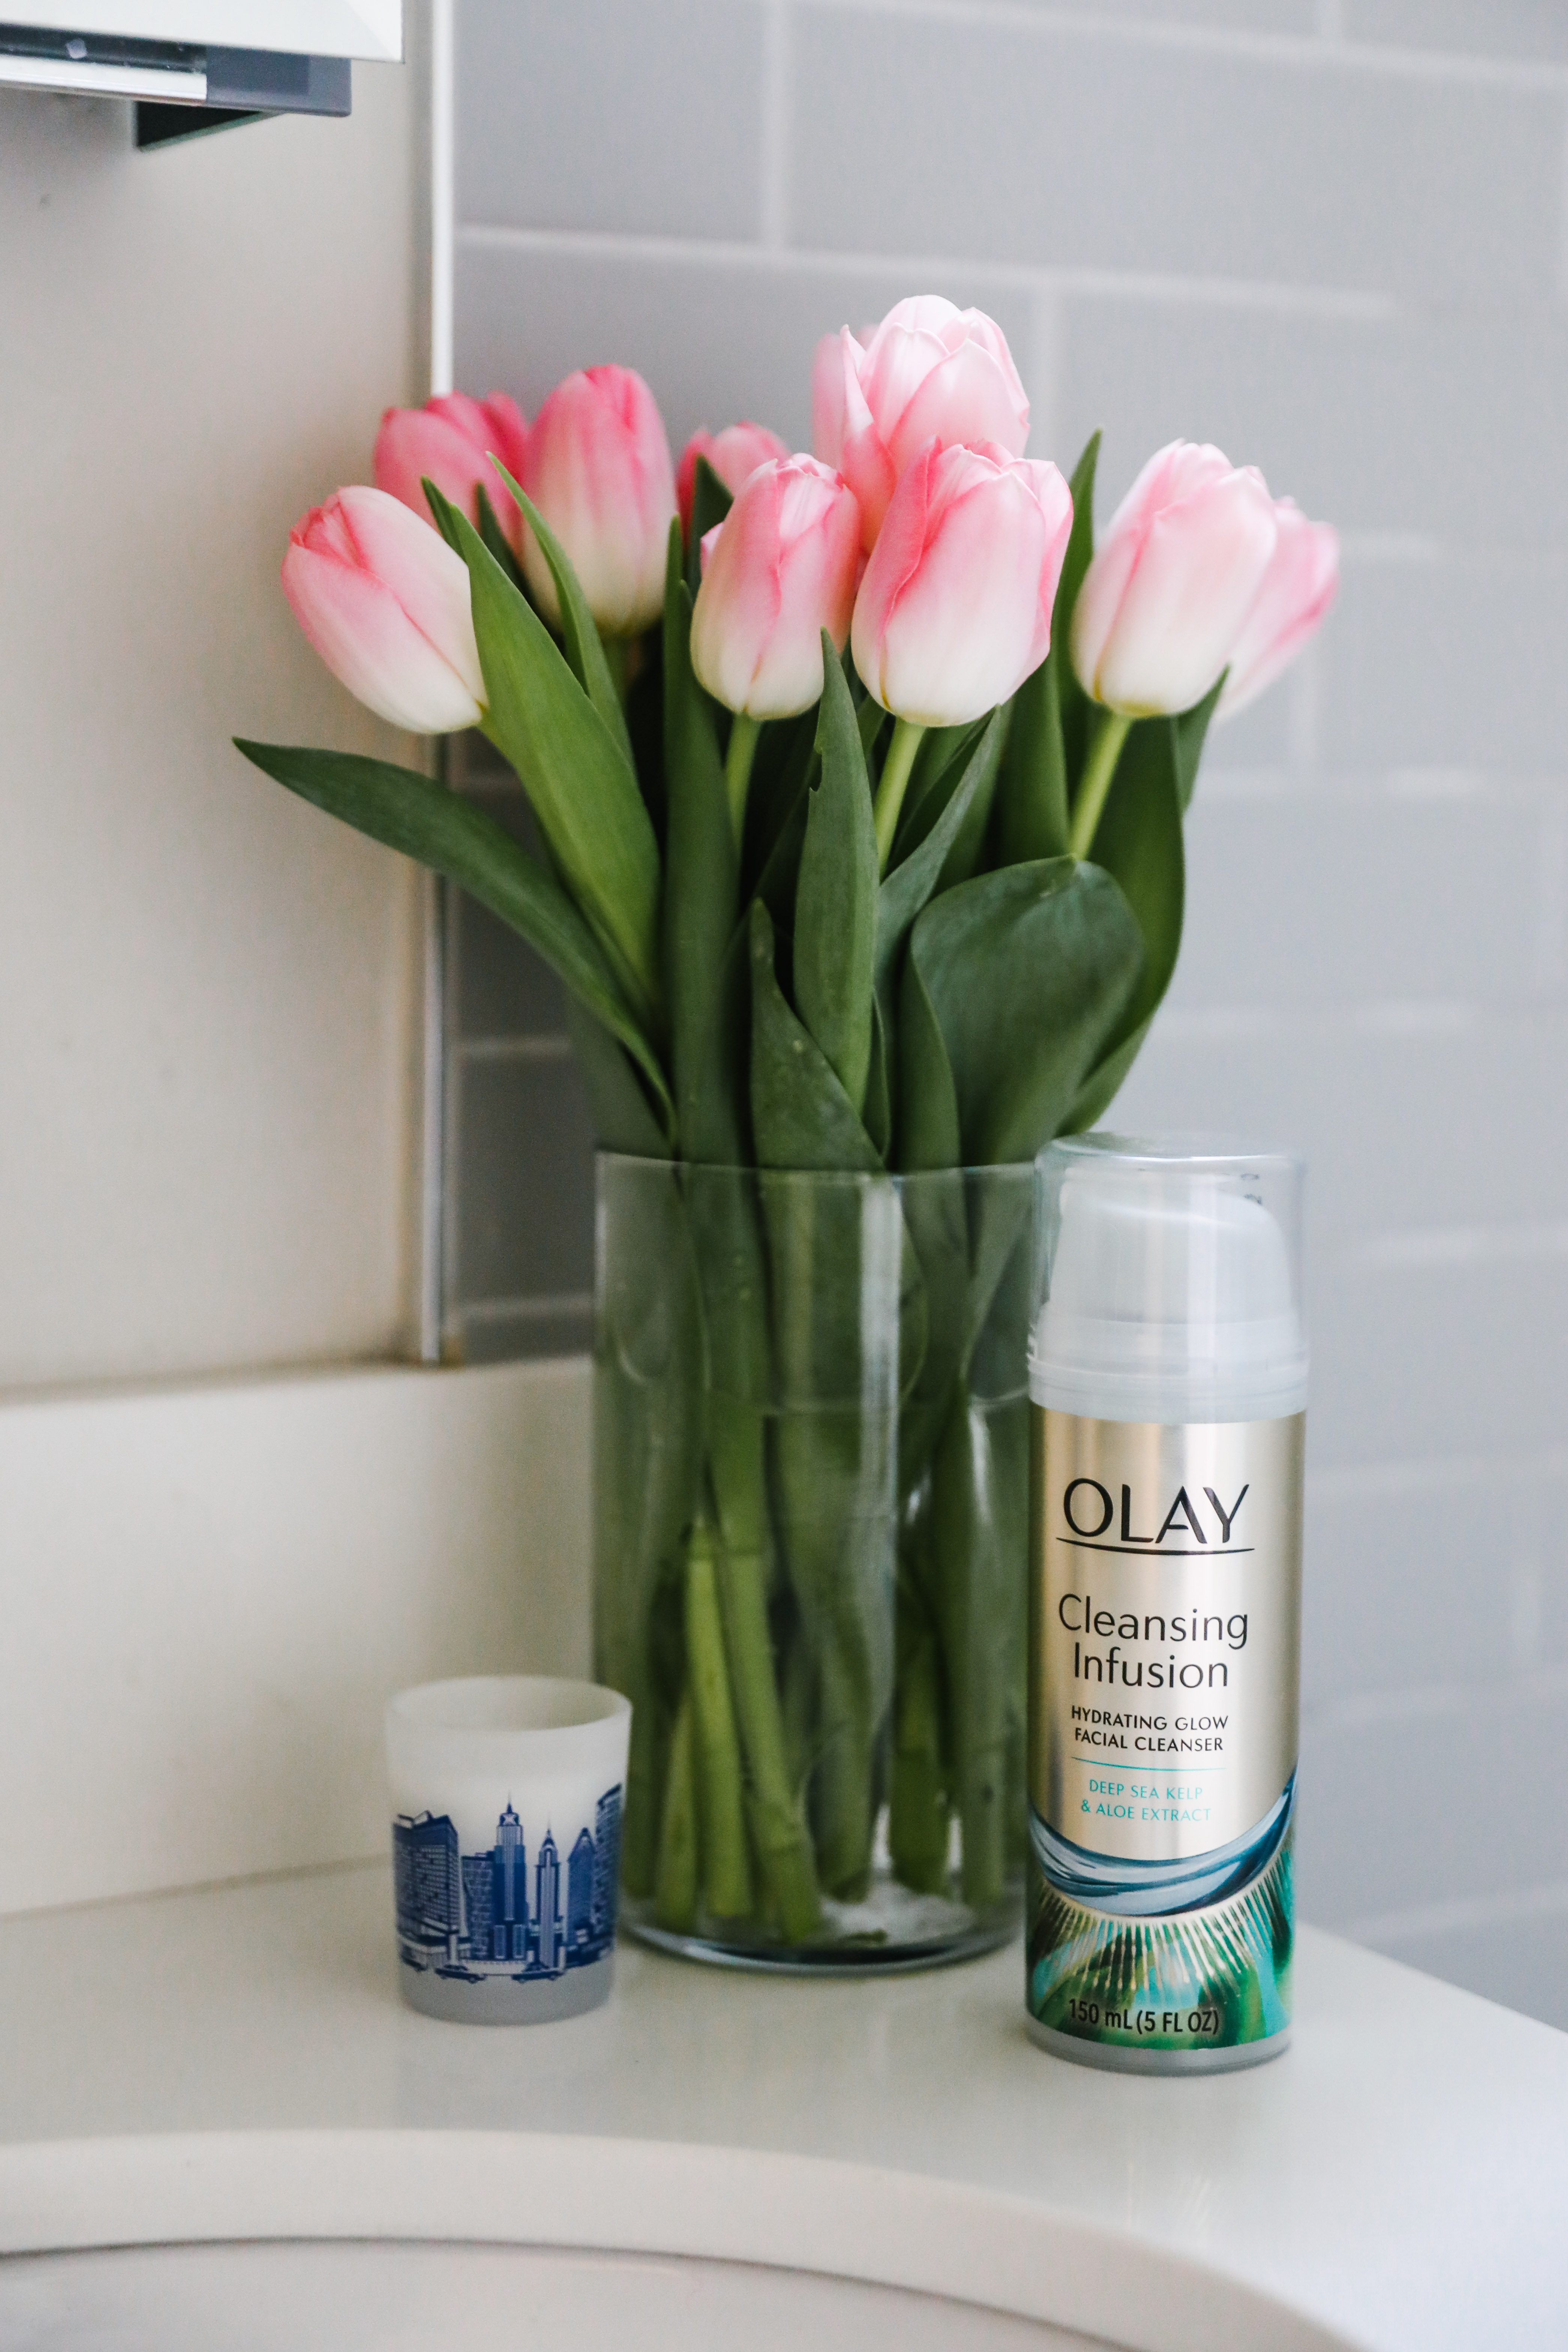 5 Ways to Get Your Glow On with Help from Olay Cleansing Infusions.